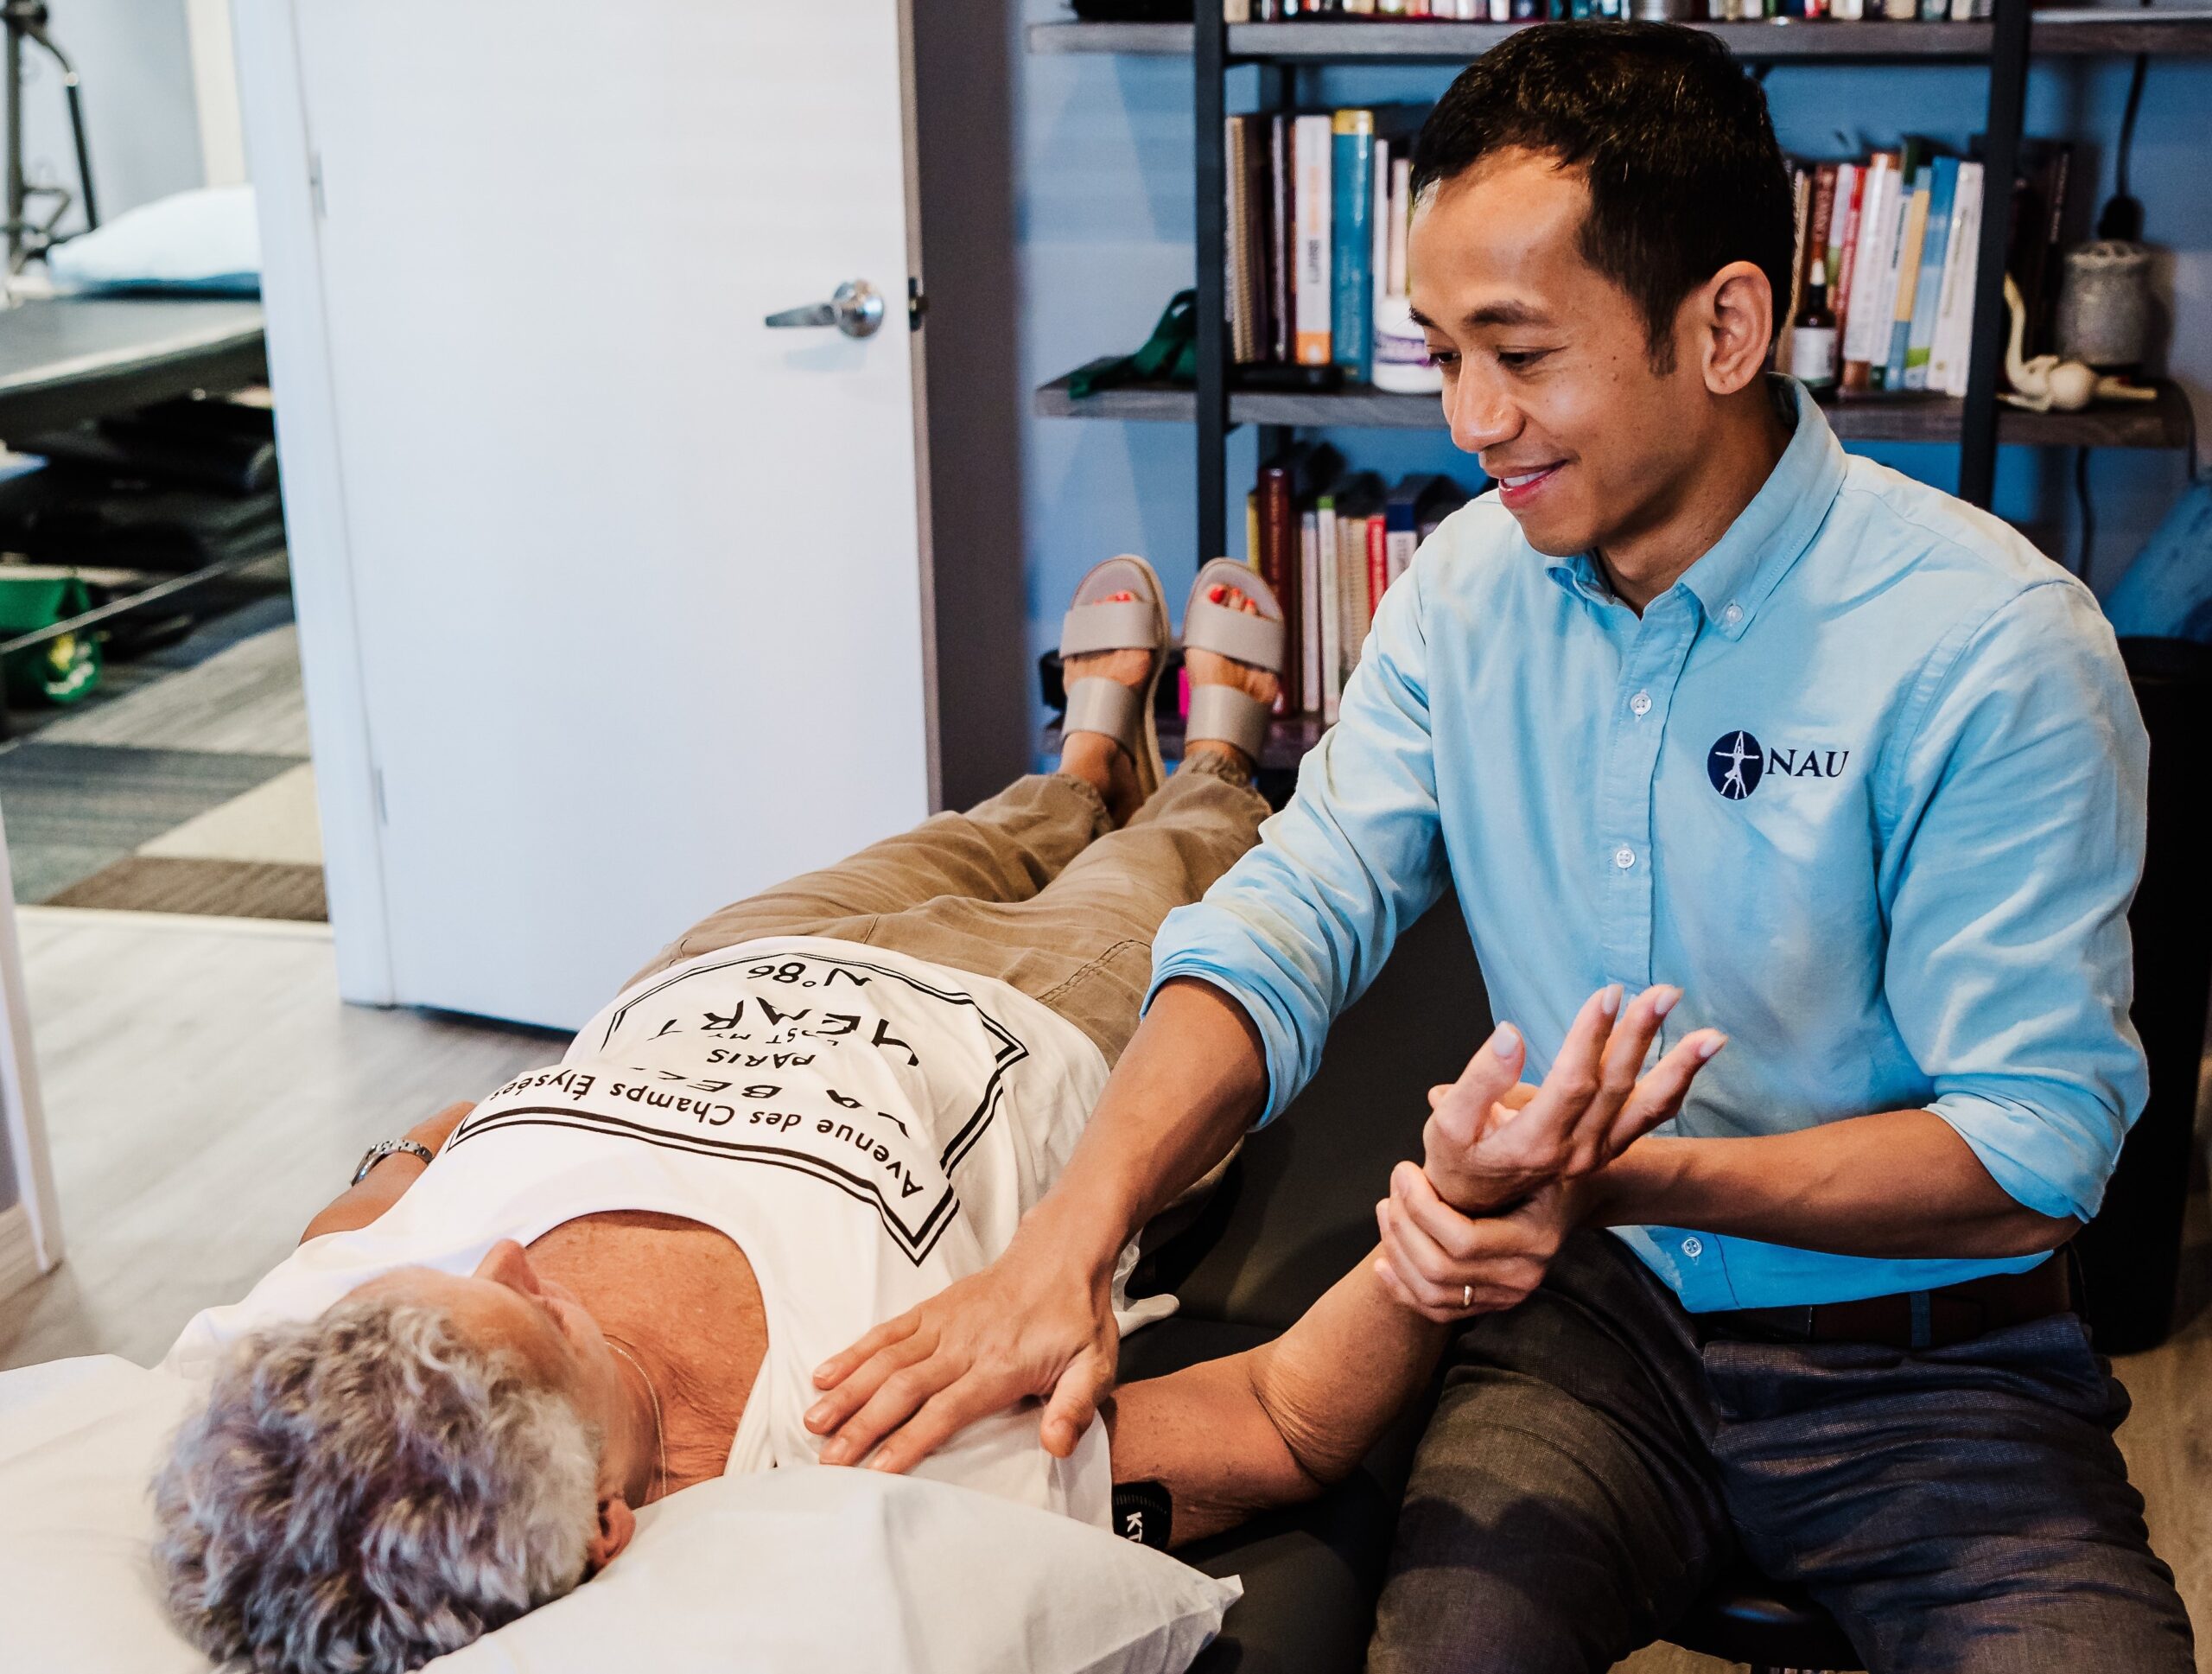 Dr. Sukie Nau helping a patient with manual therapy